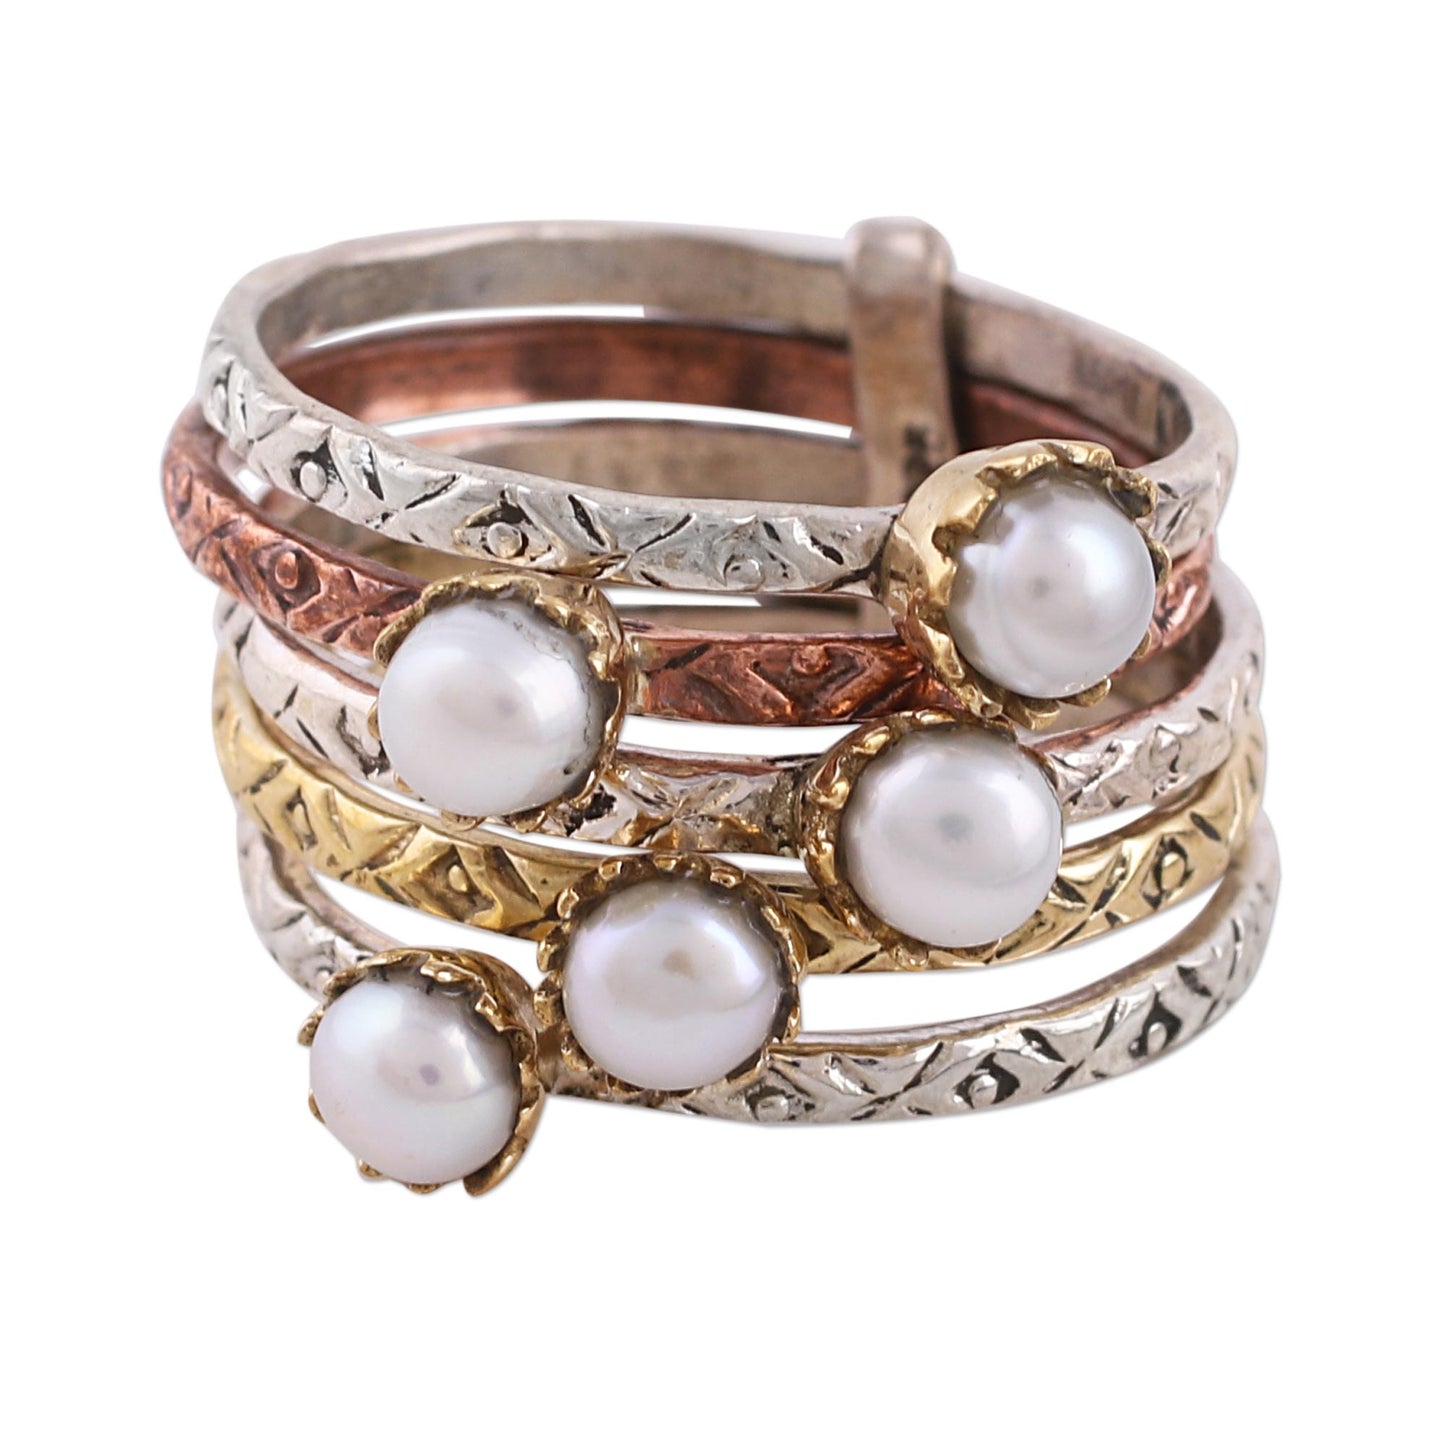 Alluring Globes in White Cultured Pearl and Sterling Silver Ring from India